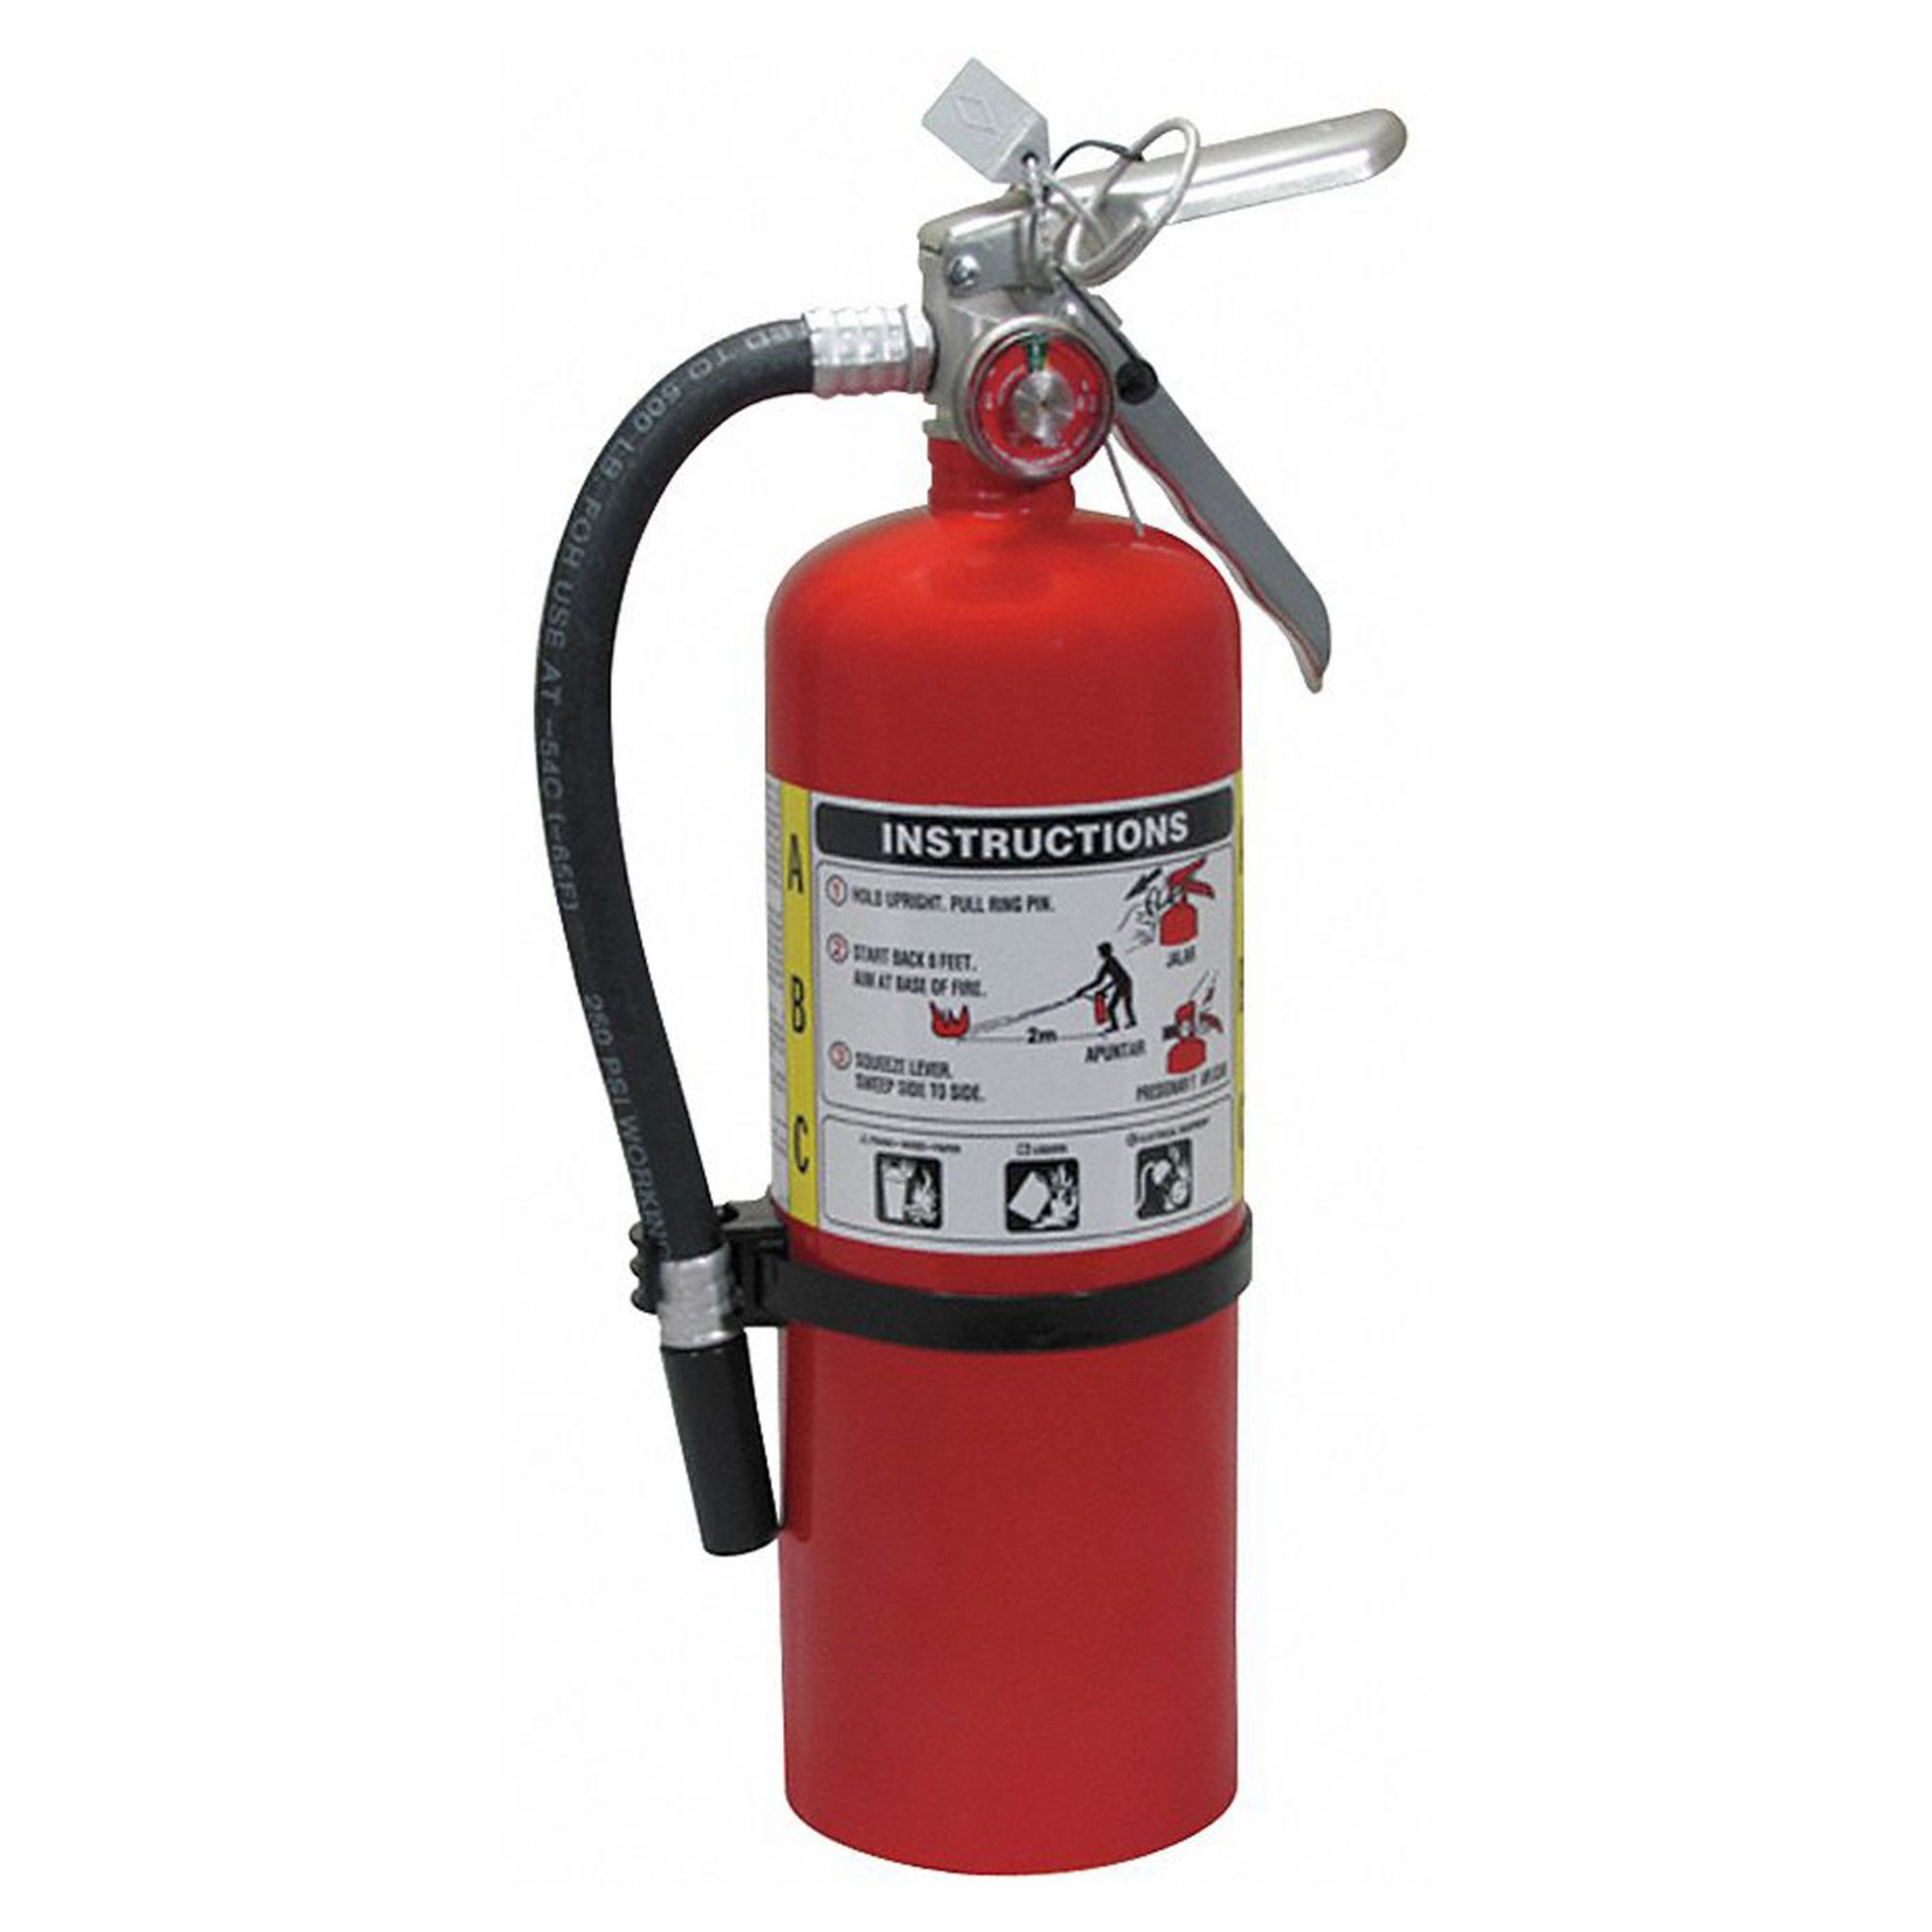 Kidde Fire Extinguisher for Home, 1-A:10-B:C, Dry Chemical